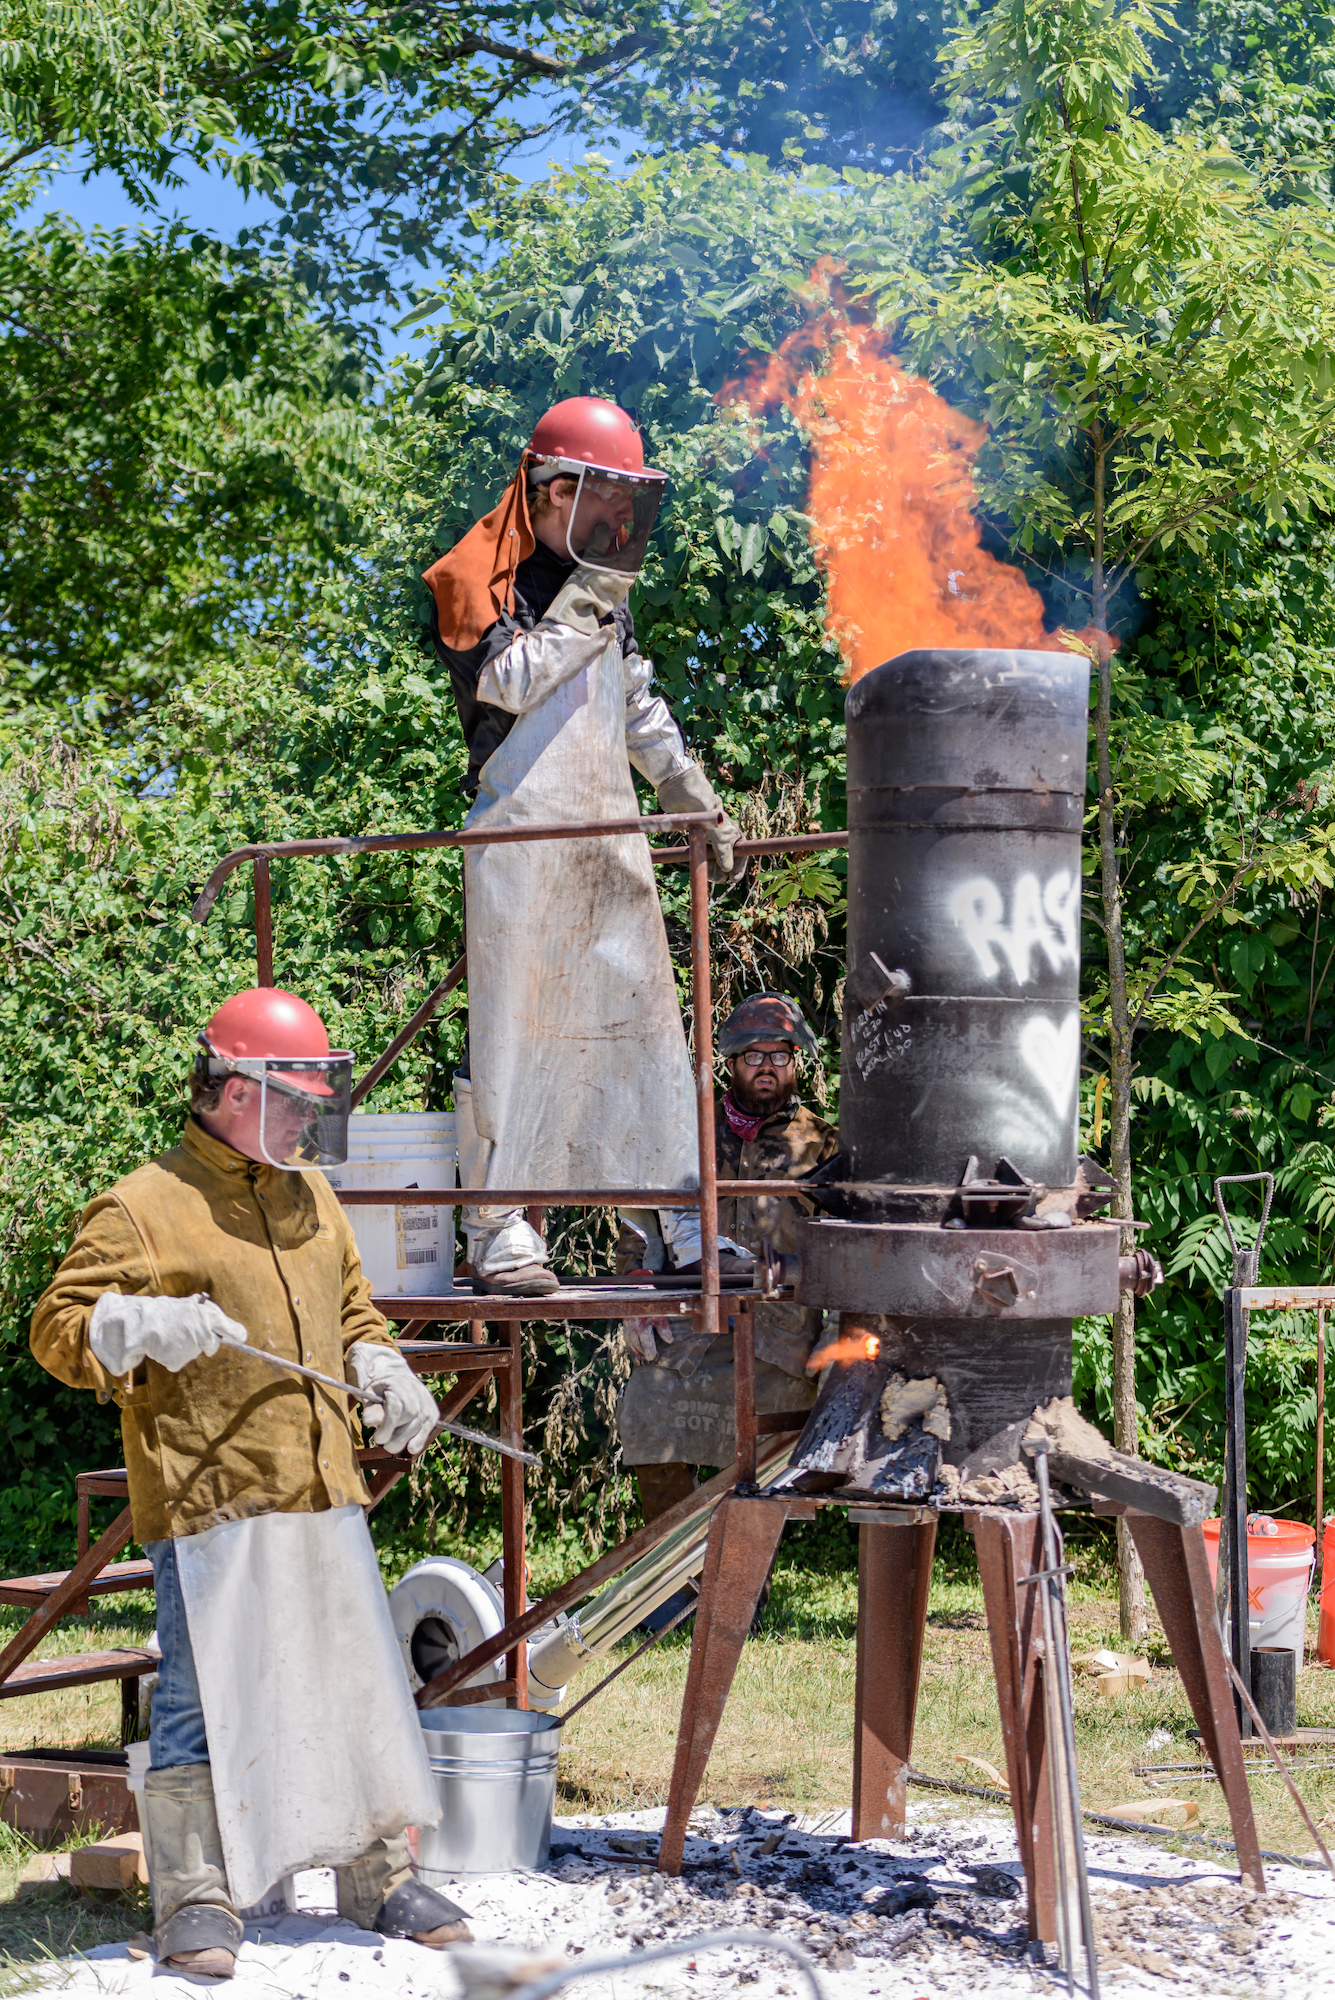 Two people stand before a large cylindrical furnace spewing fire from the top